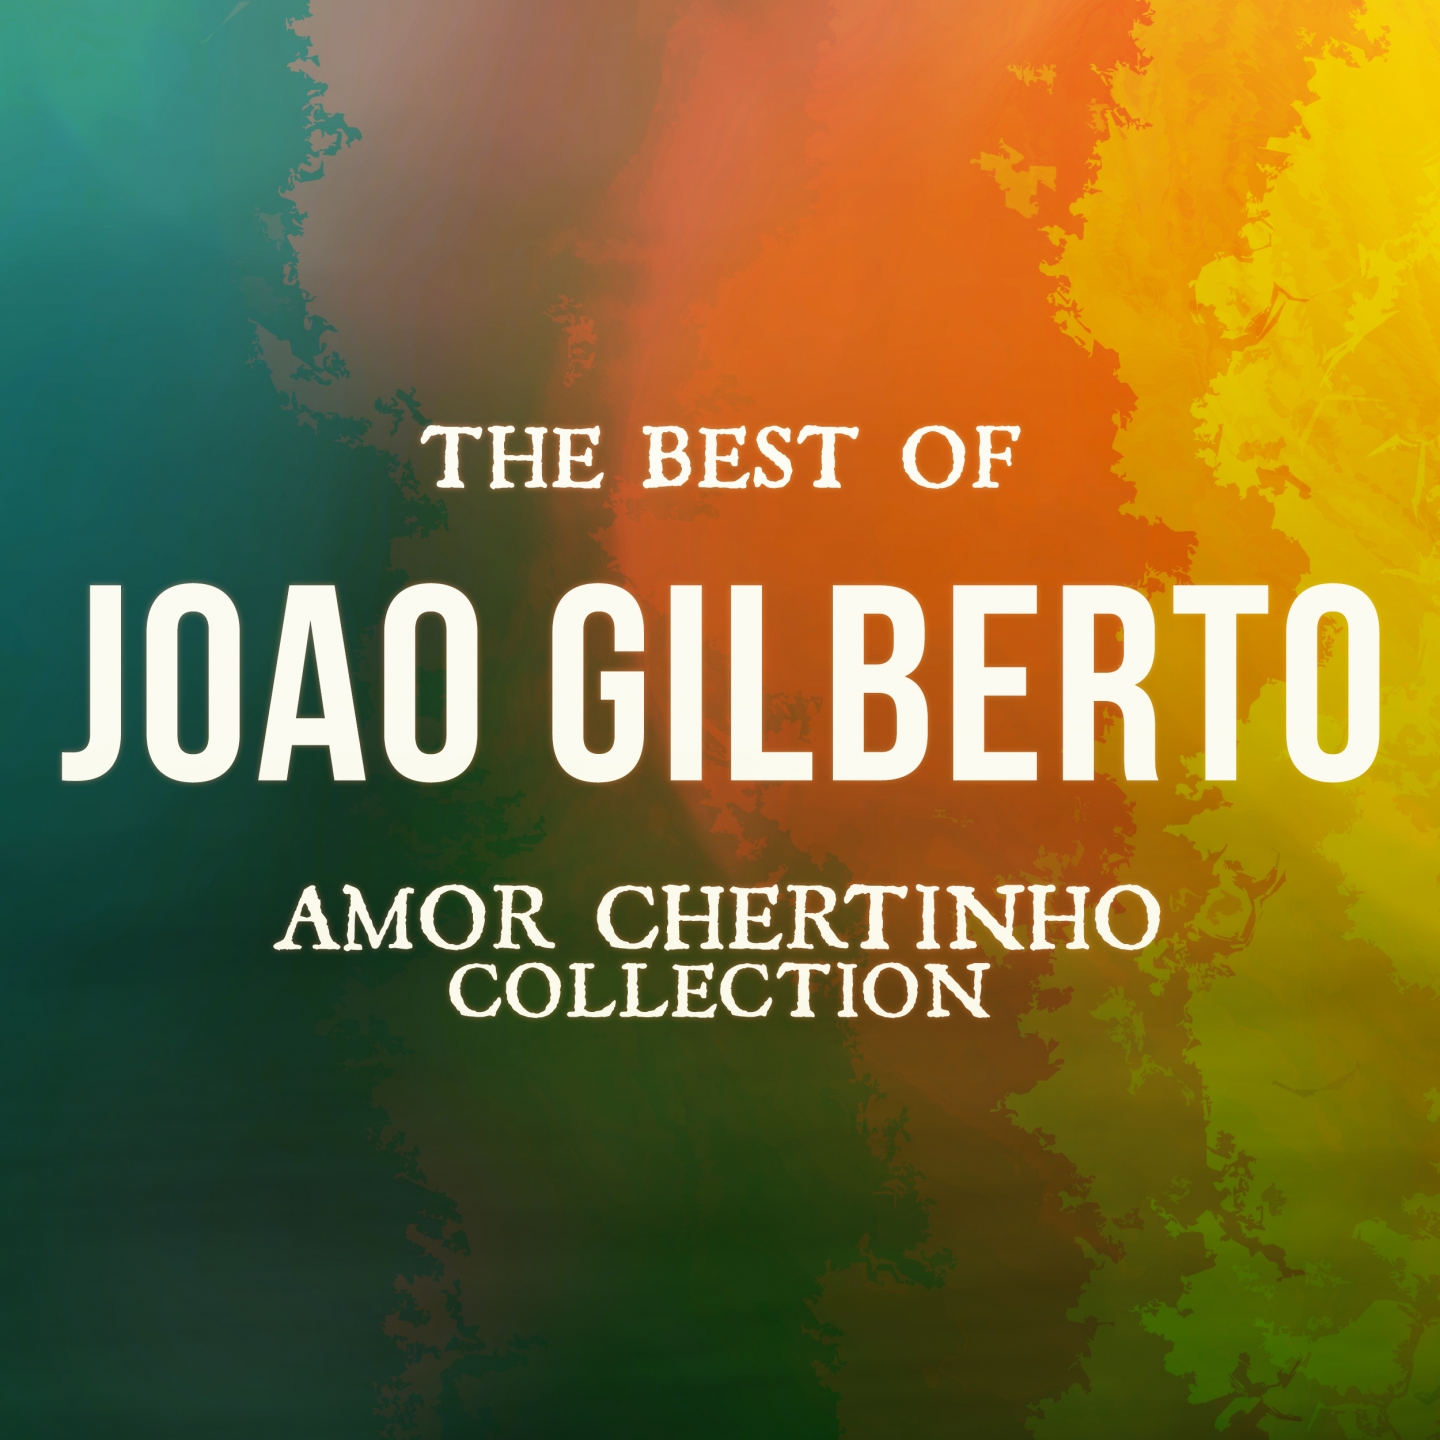 The Best Of Joao Gilberto (Amor Certinho Collection)